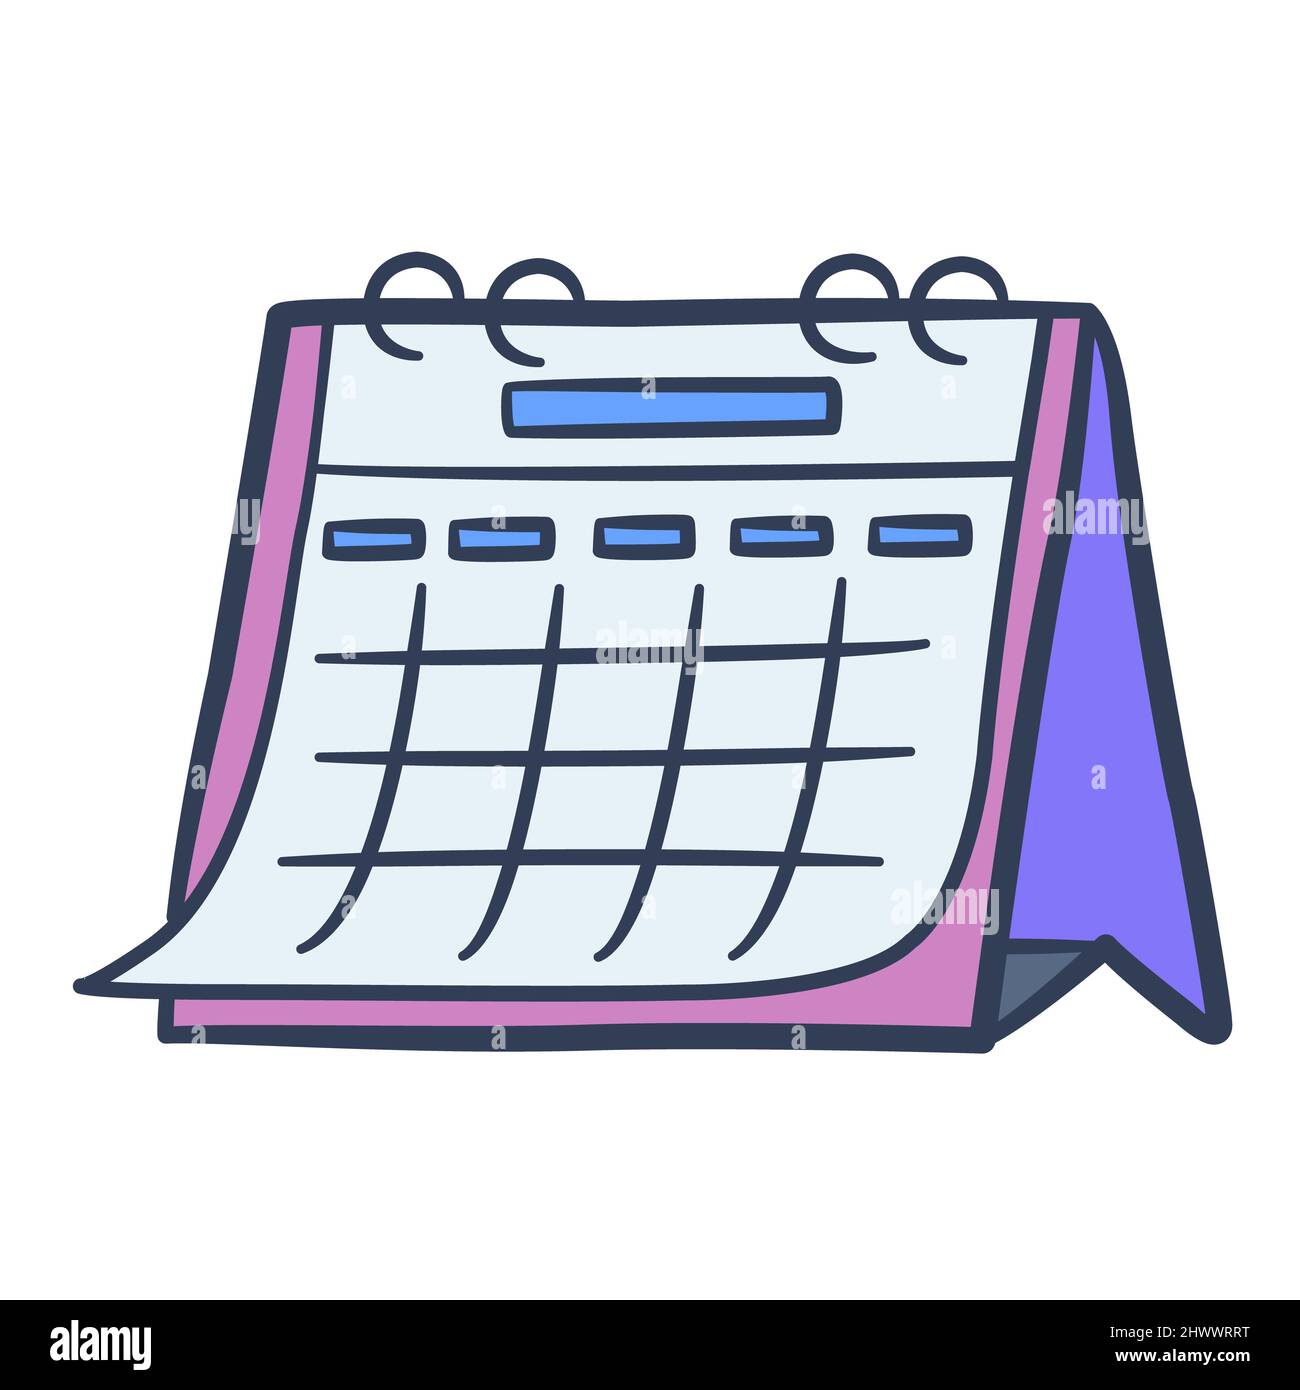 calendar time schedule timeline plan agenda project single isolated icon  with doodle colorfull color style vector Stock Photo - Alamy